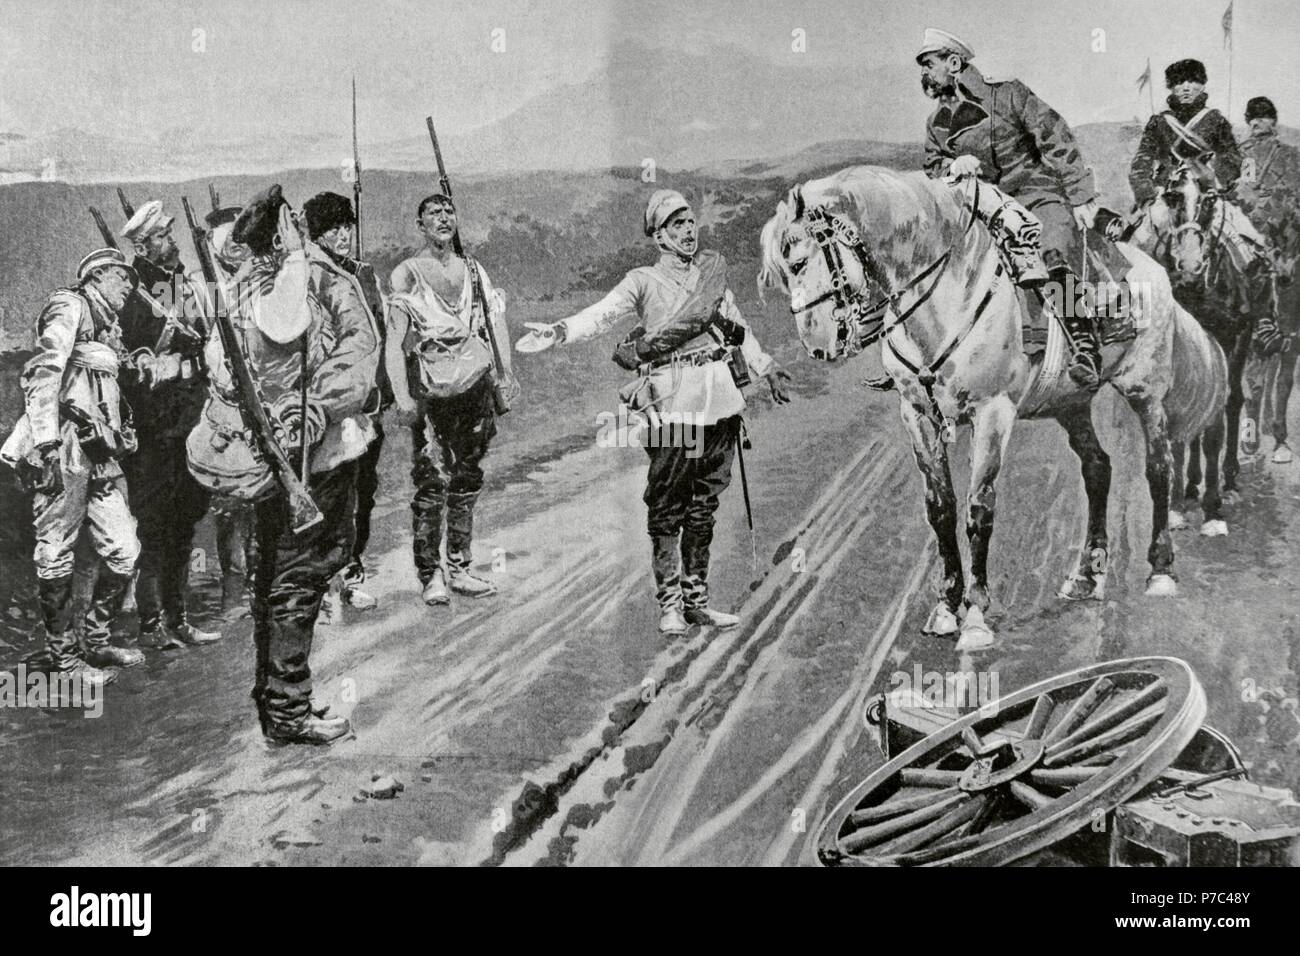 Russo-Japanese War (1904-1905). A General of the Russian division met an official of one of their regiments, accompanied by a few soldiers due to the casualties on the battle of Shaho river. Engraving in 'La Ilustracion Artistica'. Stock Photo